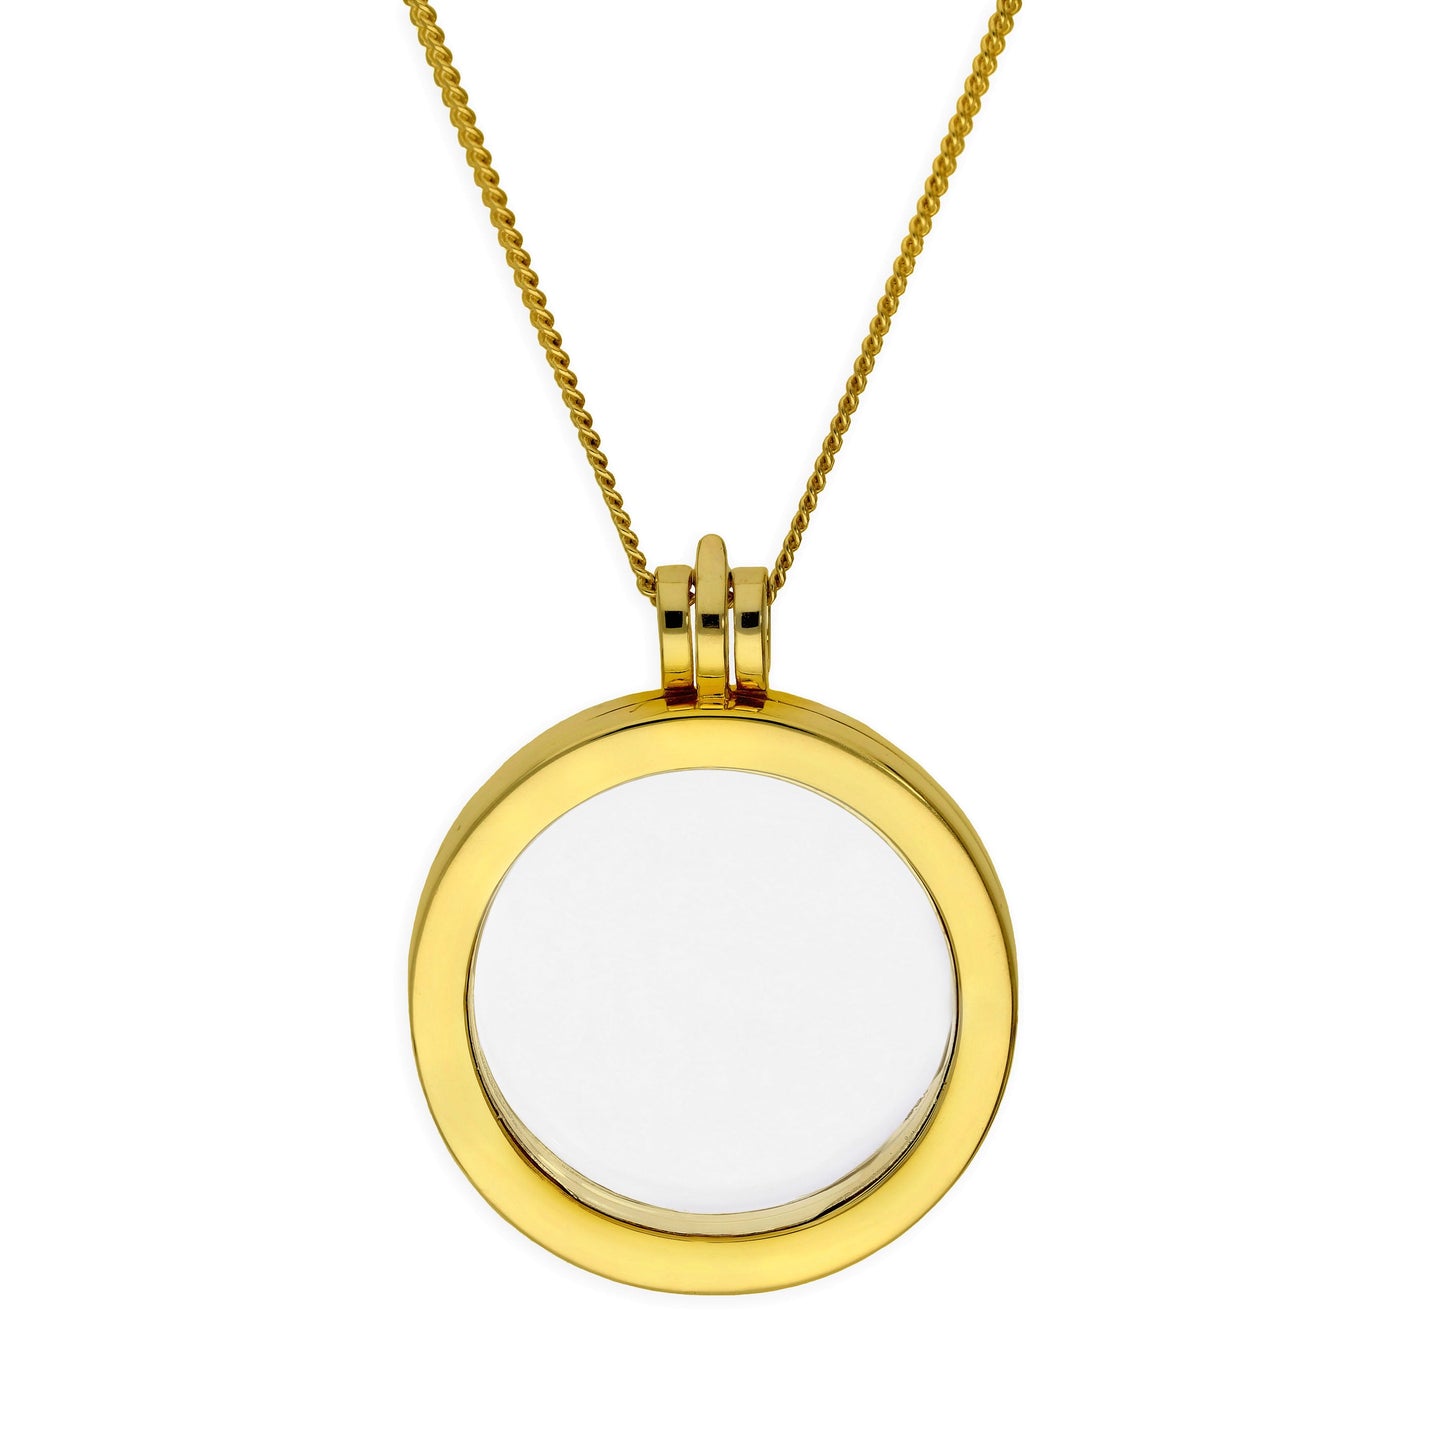 Large Gold Plated Sterling Silver Round Floating Charm Locket on Chain 16 - 24 Inches